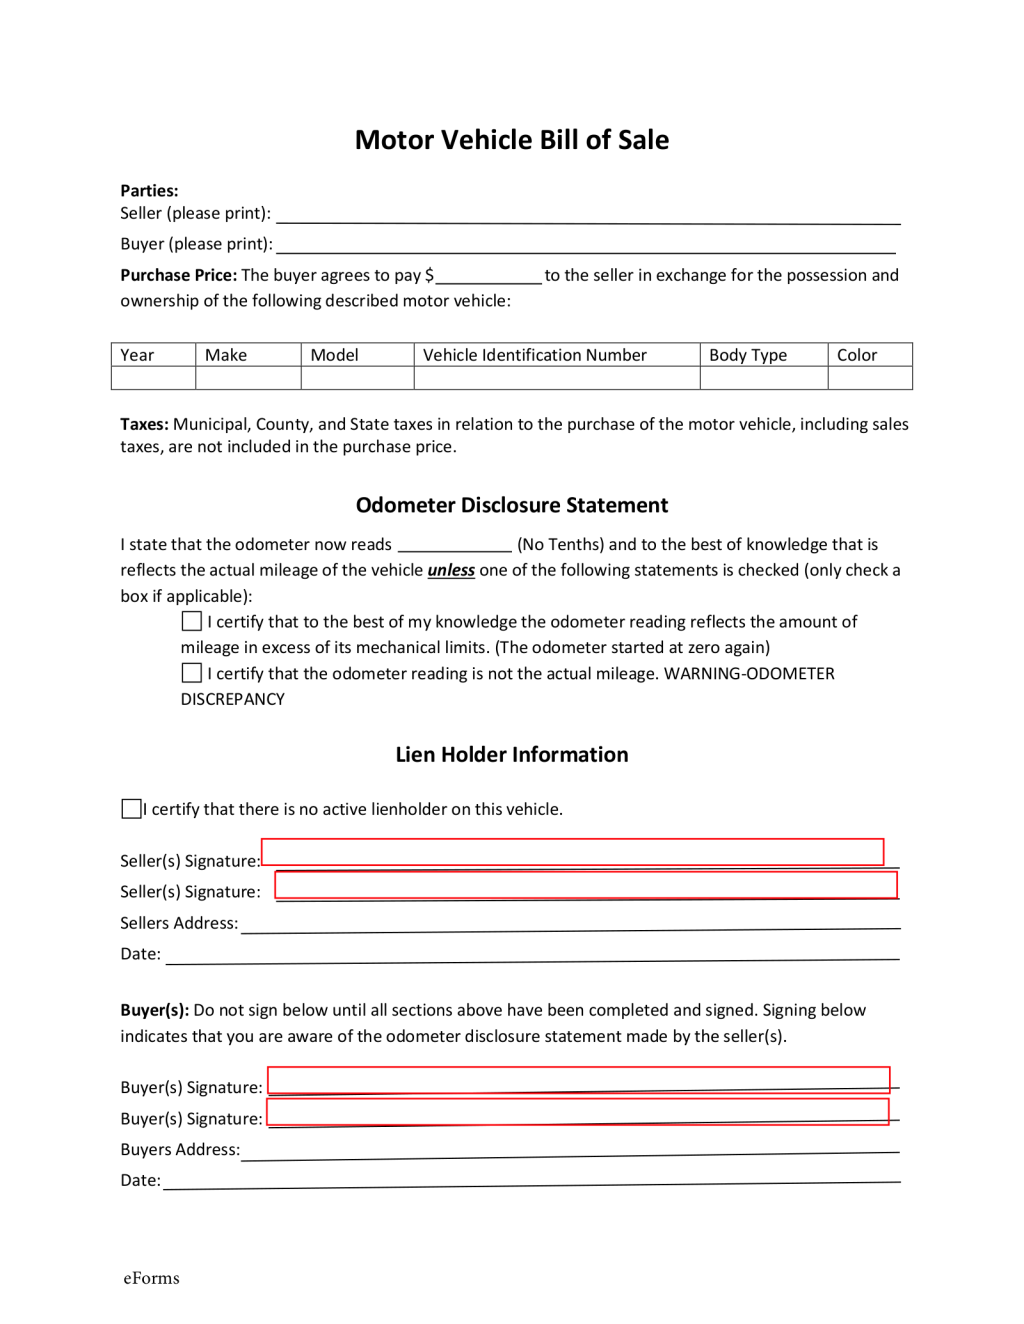 Picture of: Free Maine Motor Vehicle Bill of Sale Form – PDF – eForms